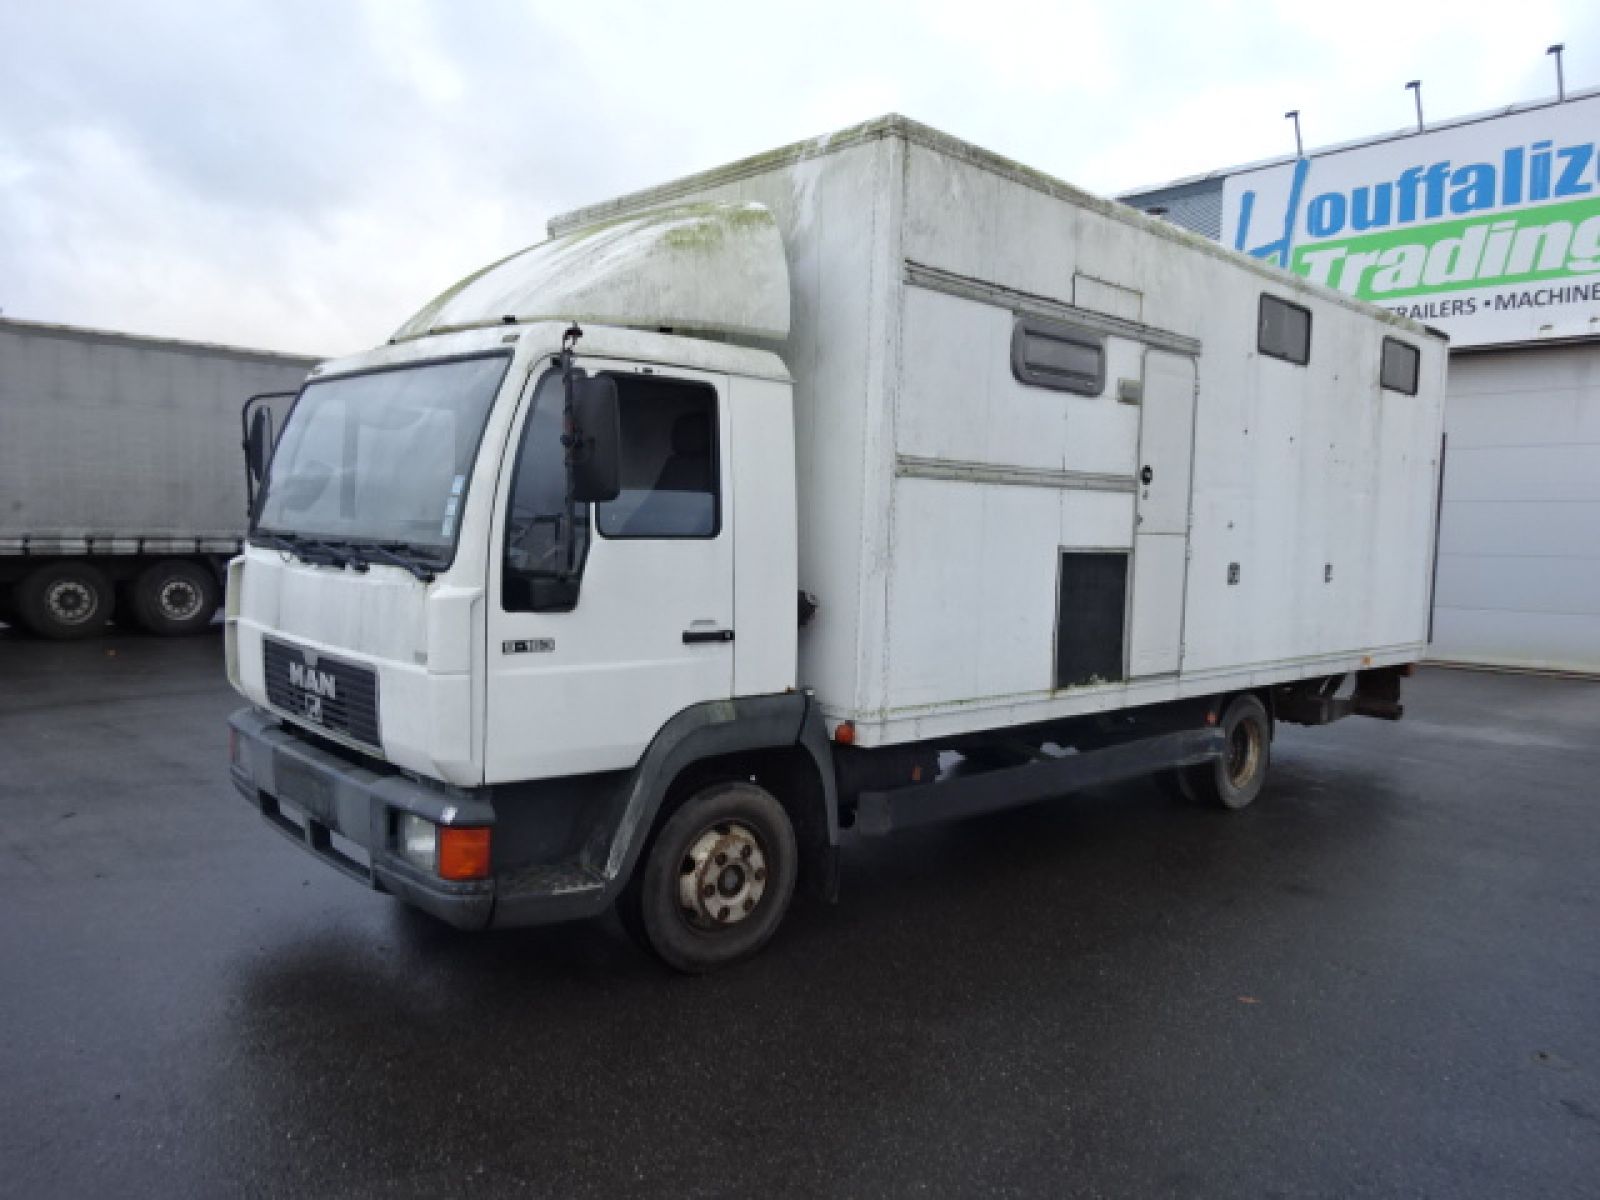 Second hand saleTruck units - MAN 9.163  CAMION FOURGON (Belgique - Europe) - Houffalize Trading s.a.